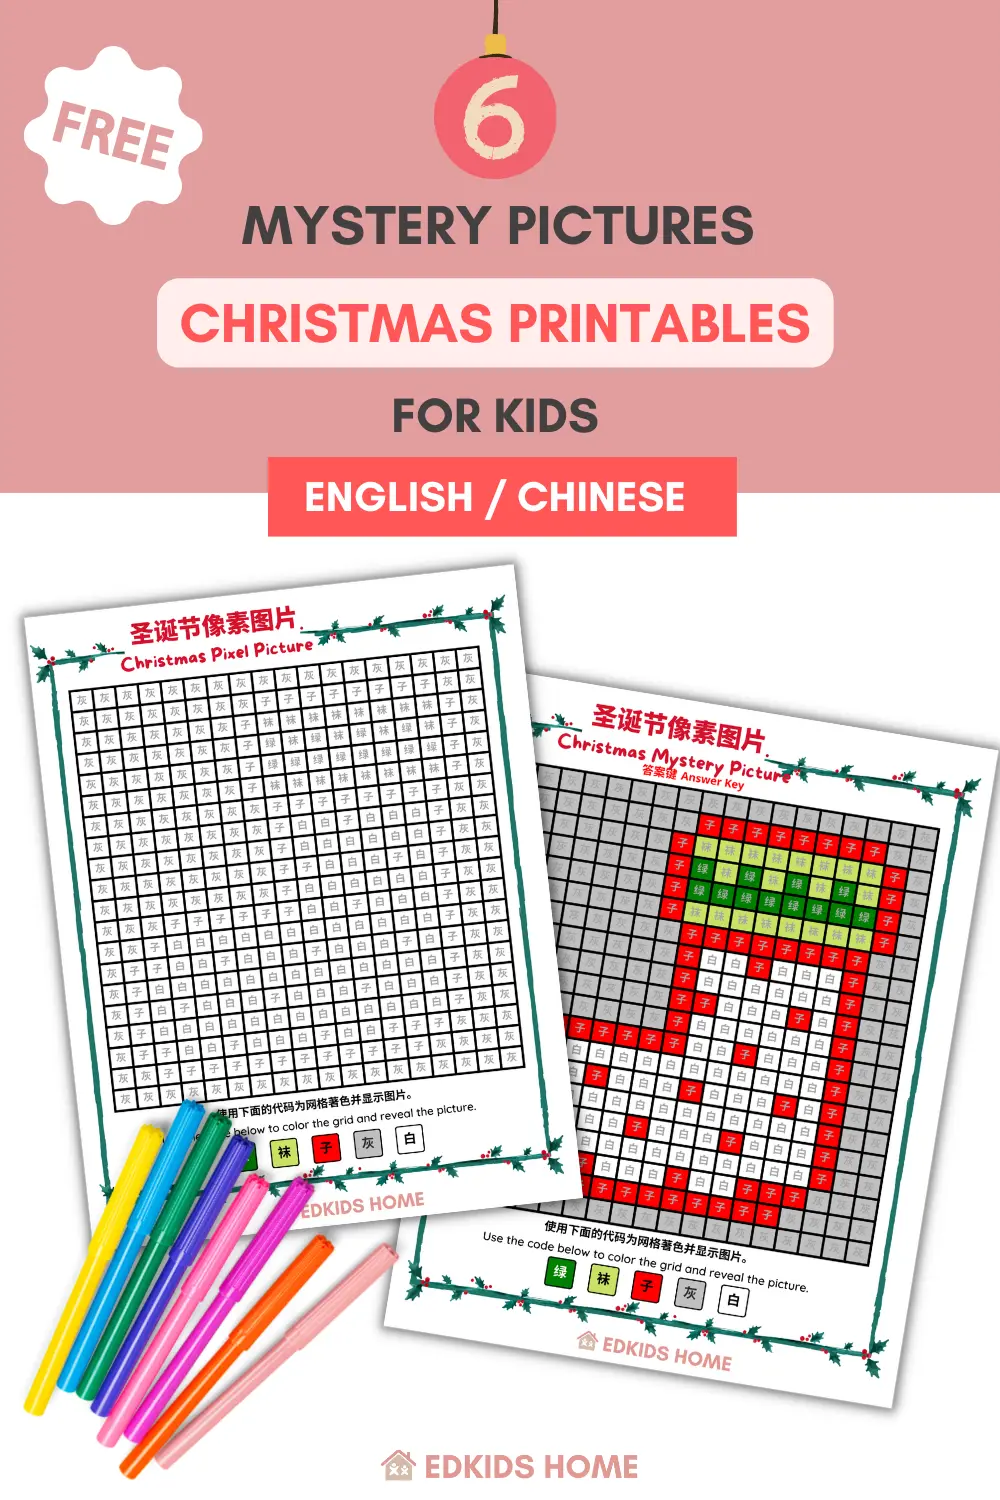 6 Free Mystery Pictures Christmas Printables for kids (English/ Chinese)